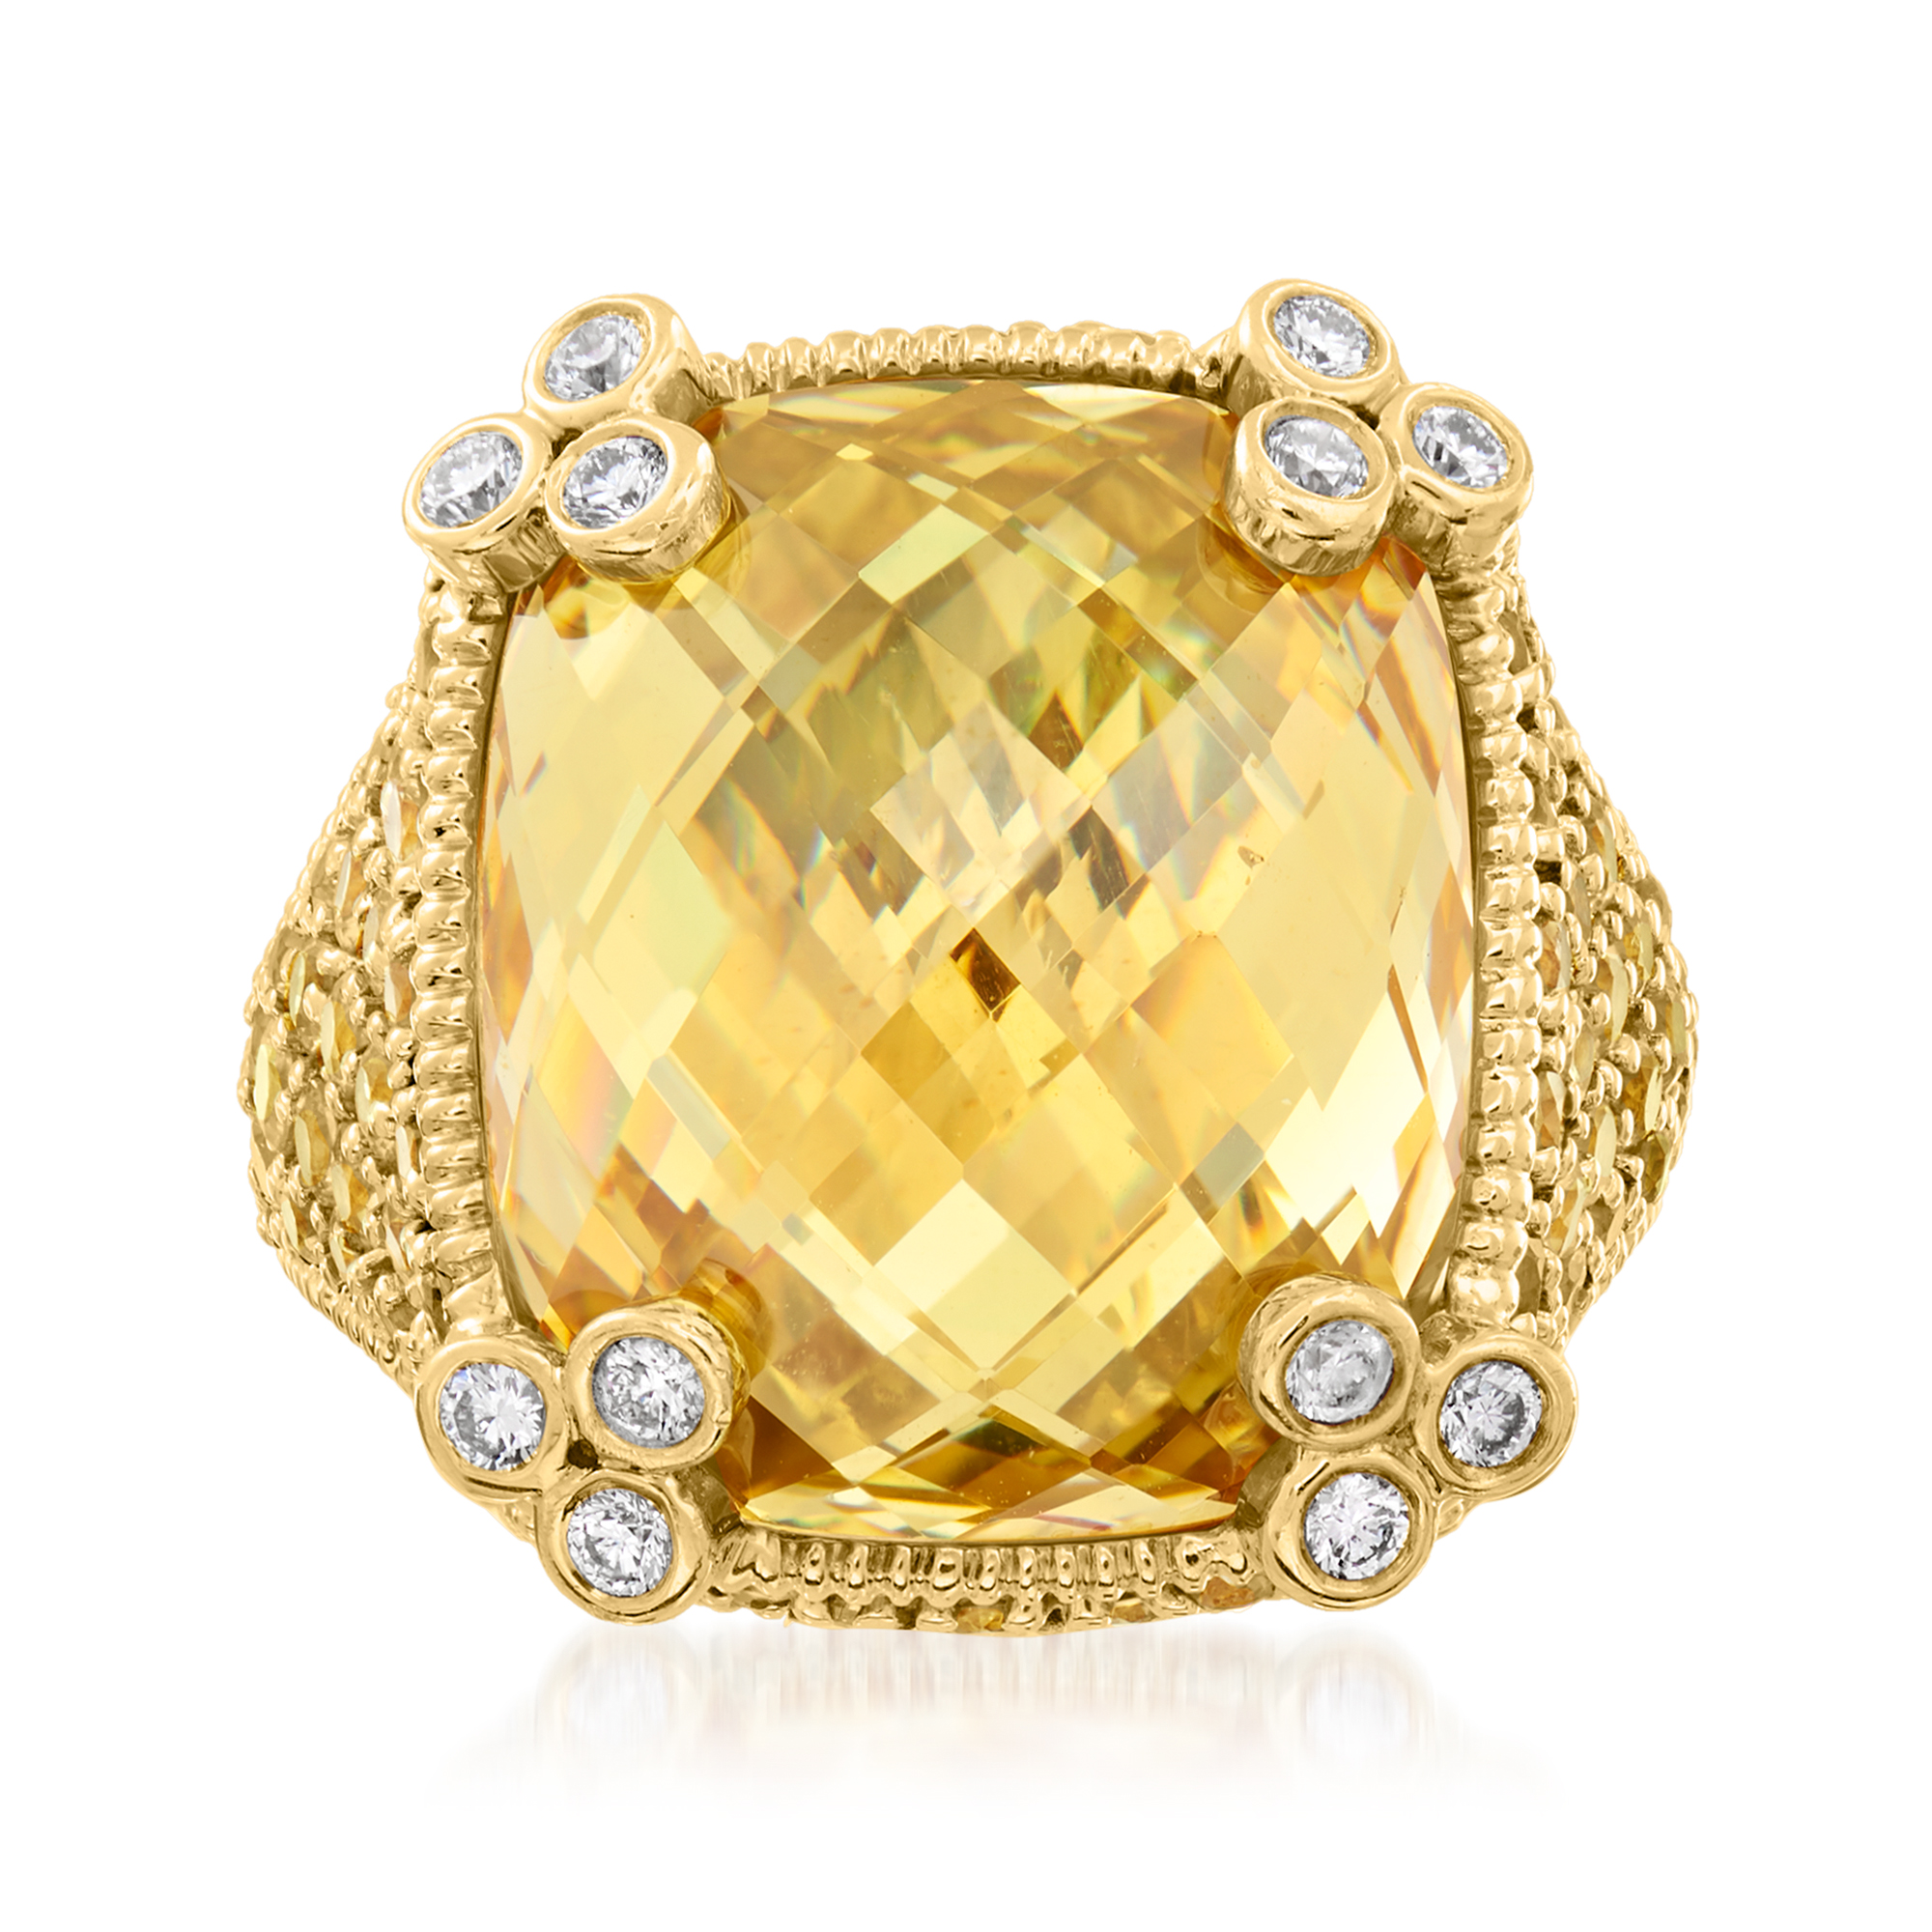 C. 1990 Vintage Judith Ripka 14.00 Carat Citrine Ring with 2.50 ct. t.w.  Yellow Sapphires and .50 ct. t.w. Diamonds in 18kt Yellow Gold | Ross-Simons